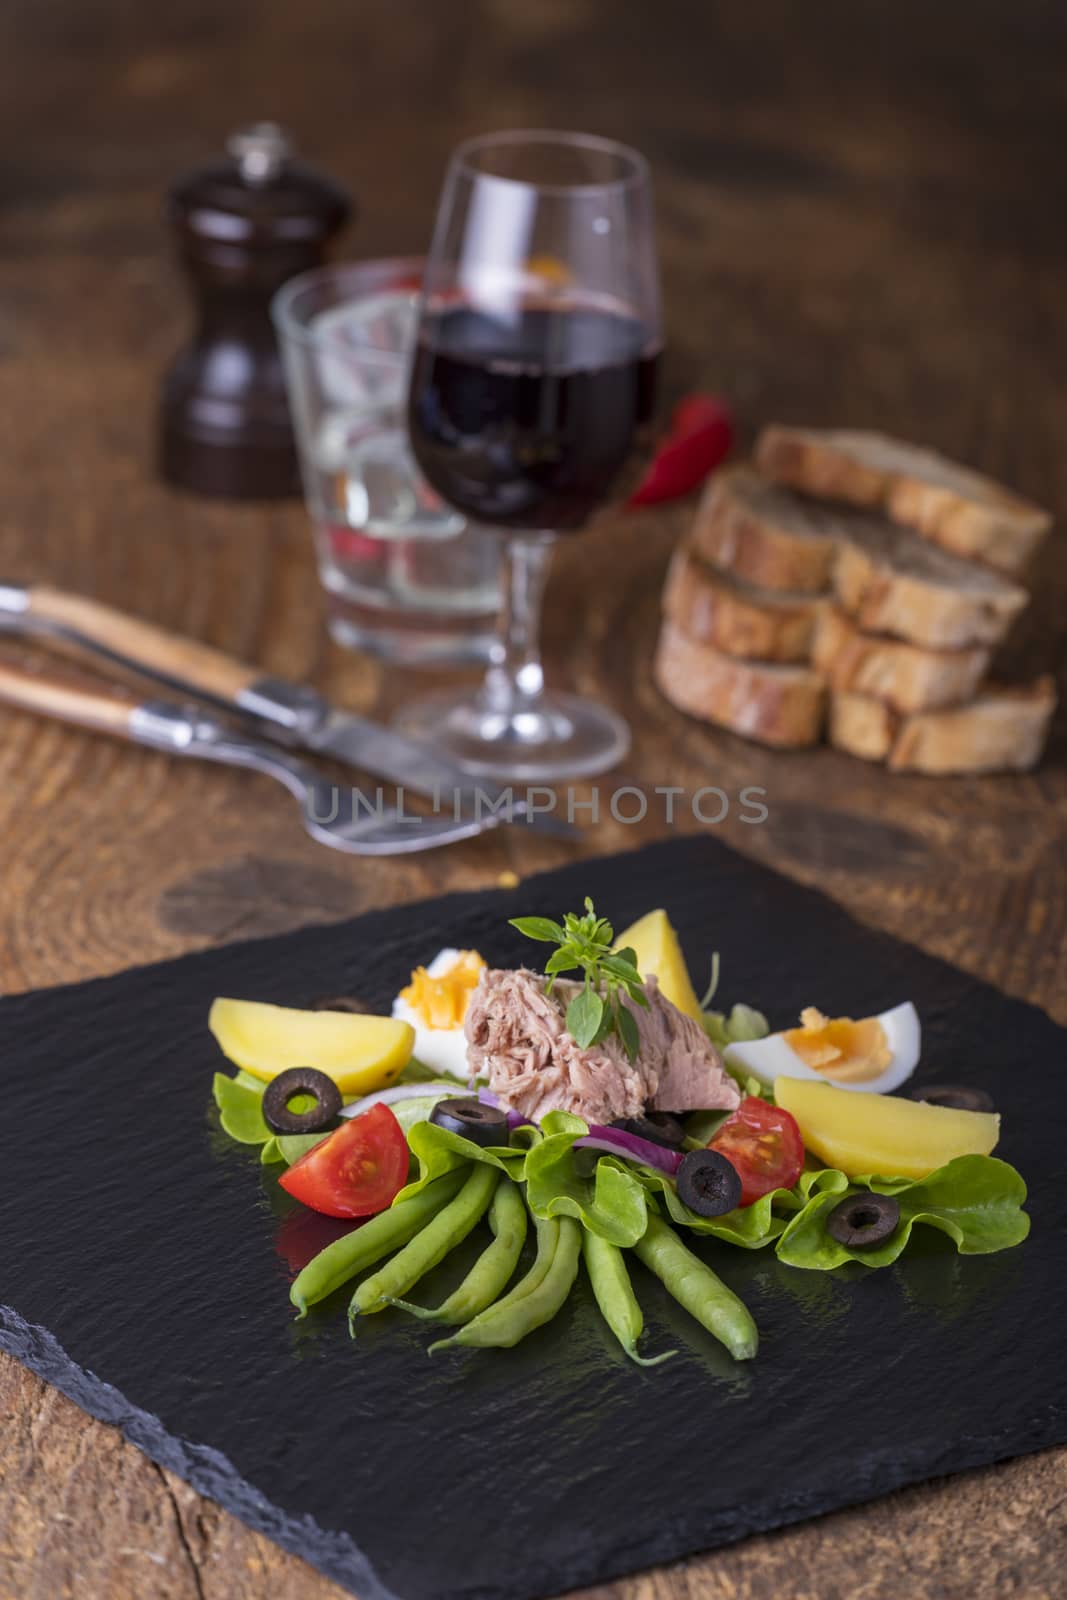 salad nicoise on a wooden background by bernjuer